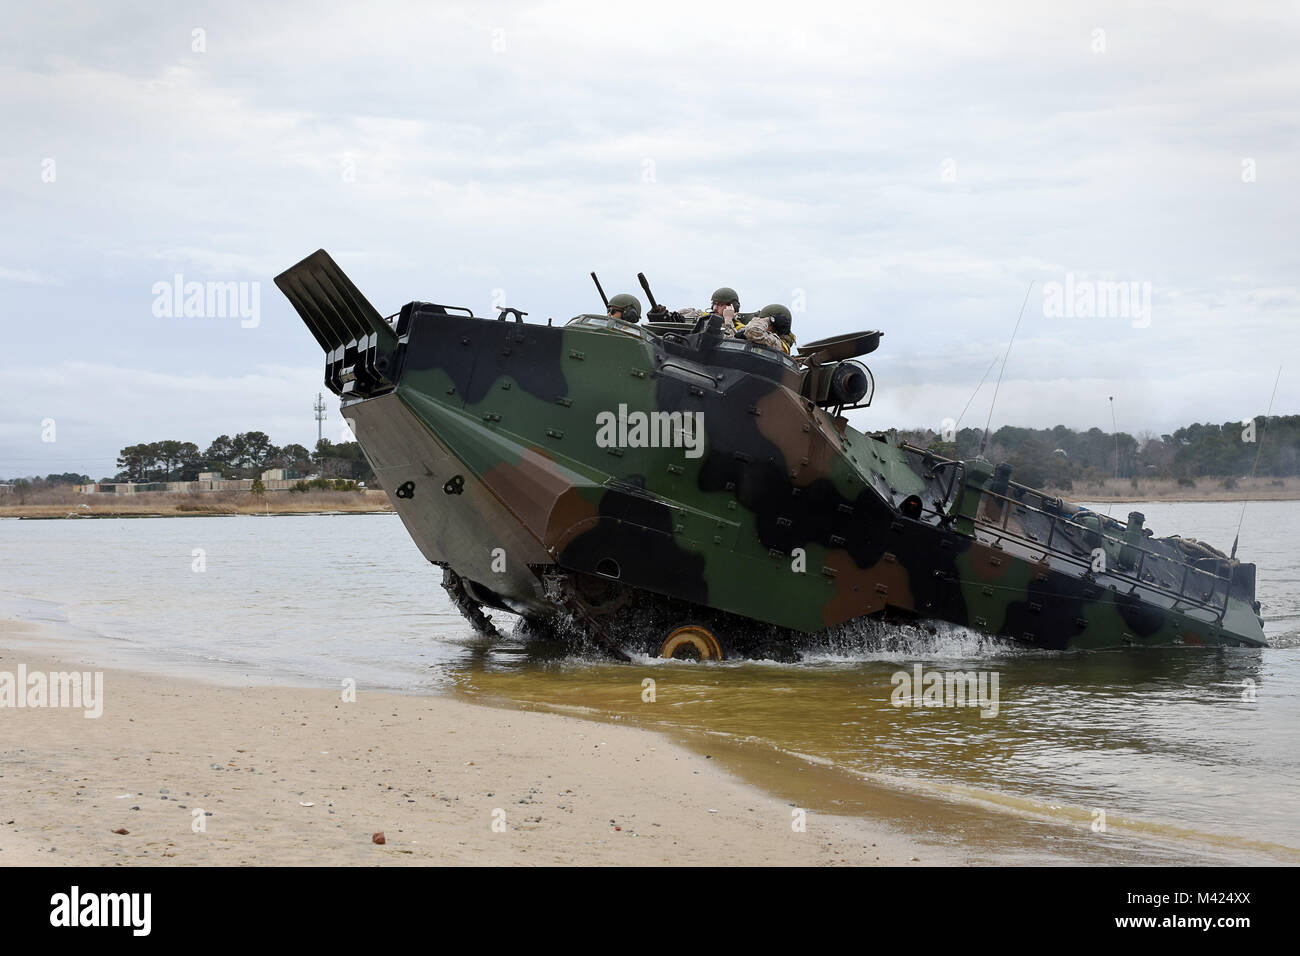 180210-N-FF140-003 NORFOLK, Va., (Feb. 10, 2018) -- Marines assigned to 4th Marine Division, 2nd Platoon, perform an attack-the-beach maneuver in an amphibious assault vehicle during a training exercise at Joint Expeditionary Base Little Creek. The semi-annual exercise supports the division's mission to provide trained combat support personnel to augment the active component in time of war or national emergency. (U.S. Navy photo by Mass Communication Specialist 2nd Class Jacob D. Galito/Released) Stock Photo